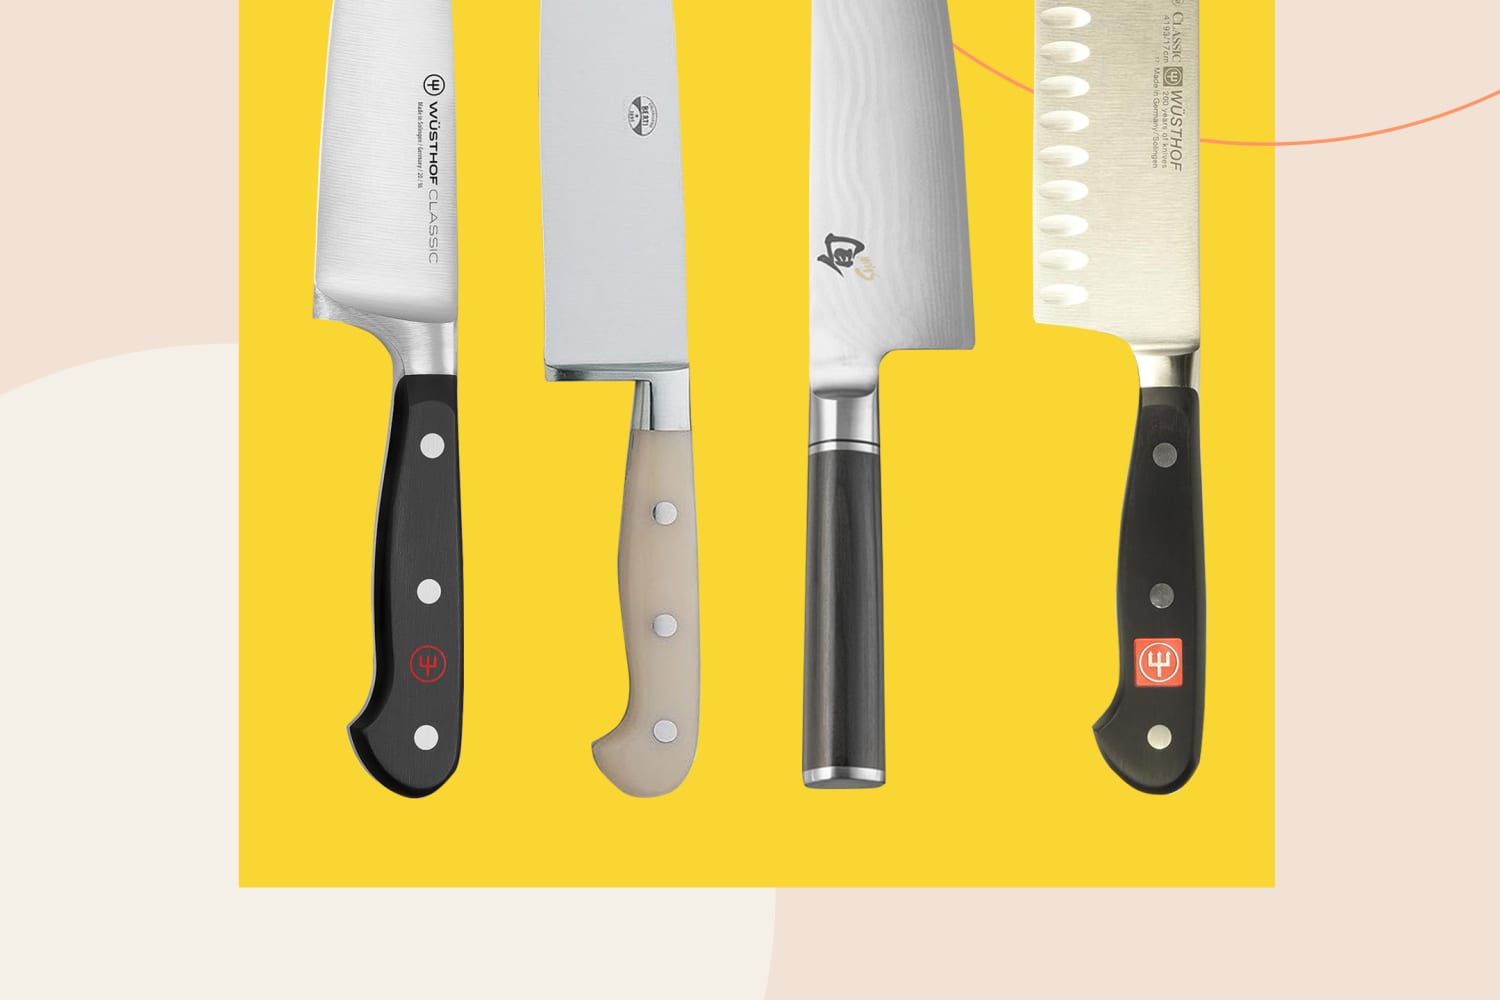 Best Masterchef Set Of Knives for sale in Niles, Illinois for 2023